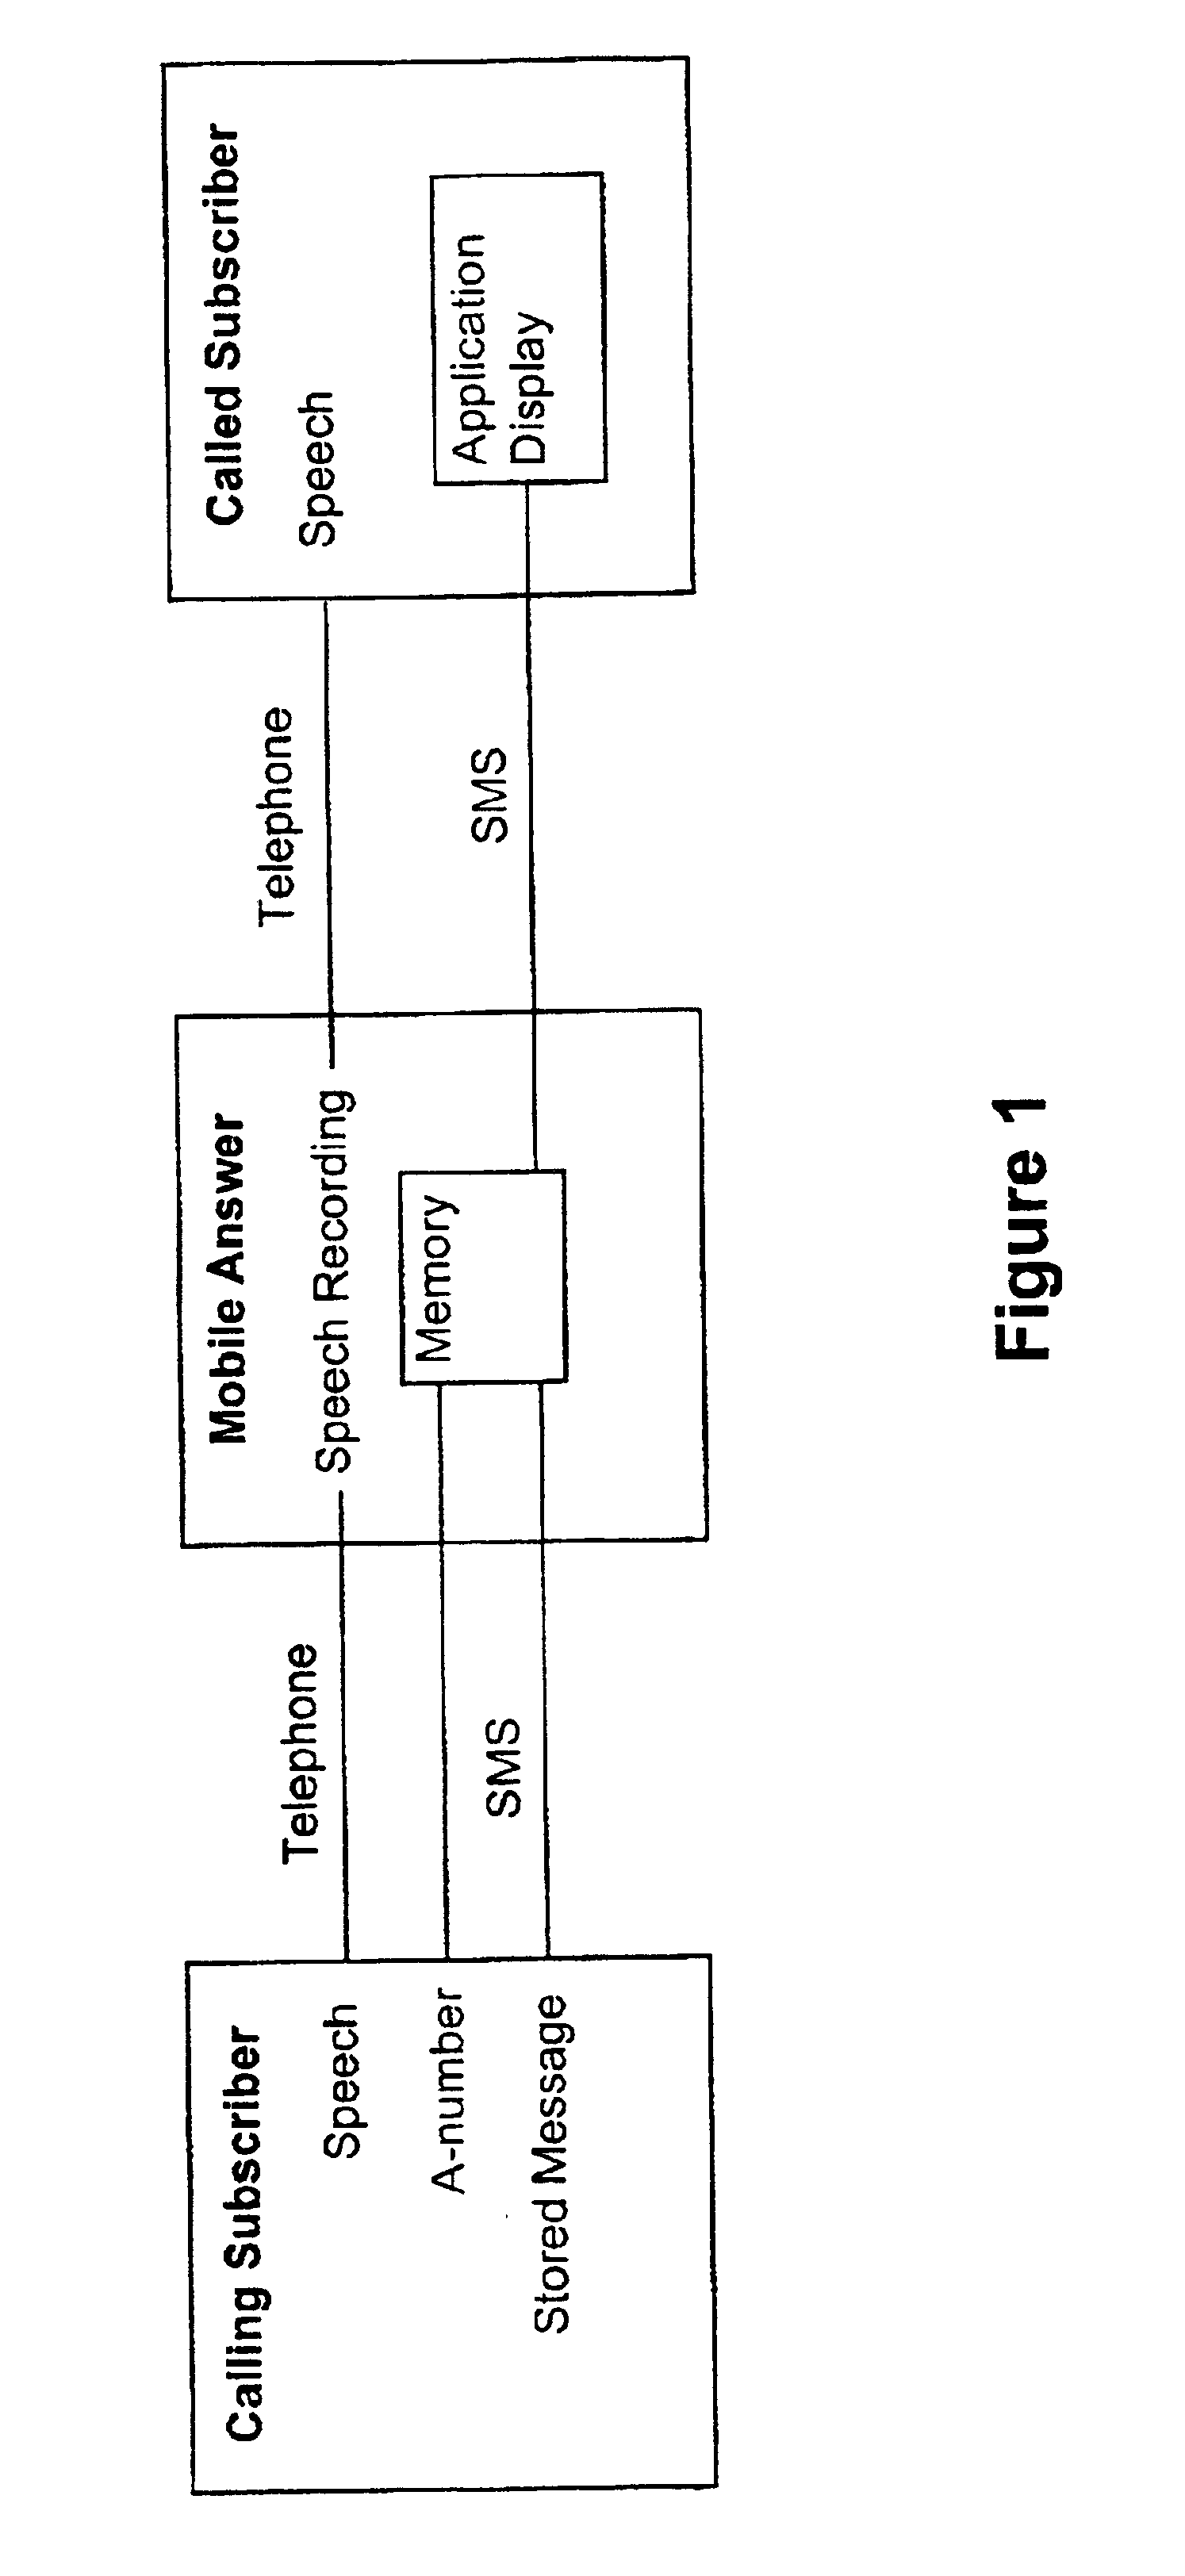 Procedure to transmit information at telephone answering service